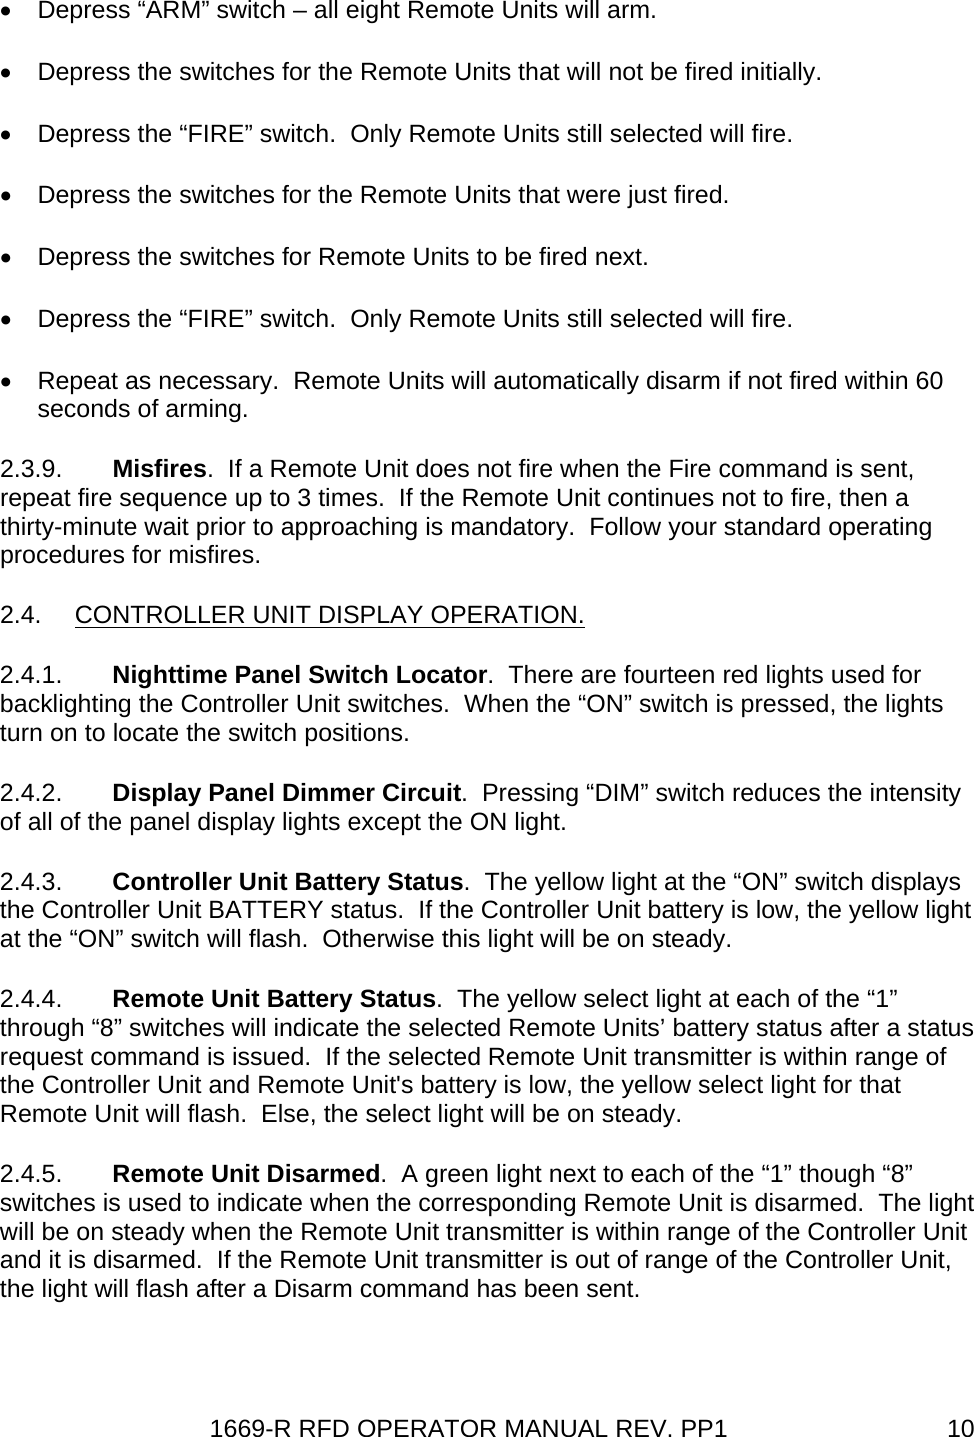 1669-R RFD OPERATOR MANUAL REV. PP1  10•  Depress “ARM” switch – all eight Remote Units will arm. •  Depress the switches for the Remote Units that will not be fired initially. •  Depress the “FIRE” switch.  Only Remote Units still selected will fire. •  Depress the switches for the Remote Units that were just fired. •  Depress the switches for Remote Units to be fired next. •  Depress the “FIRE” switch.  Only Remote Units still selected will fire. •  Repeat as necessary.  Remote Units will automatically disarm if not fired within 60 seconds of arming. 2.3.9.  Misfires.  If a Remote Unit does not fire when the Fire command is sent, repeat fire sequence up to 3 times.  If the Remote Unit continues not to fire, then a thirty-minute wait prior to approaching is mandatory.  Follow your standard operating procedures for misfires. 2.4. CONTROLLER UNIT DISPLAY OPERATION. 2.4.1.  Nighttime Panel Switch Locator.  There are fourteen red lights used for backlighting the Controller Unit switches.  When the “ON” switch is pressed, the lights turn on to locate the switch positions. 2.4.2.  Display Panel Dimmer Circuit.  Pressing “DIM” switch reduces the intensity of all of the panel display lights except the ON light. 2.4.3.  Controller Unit Battery Status.  The yellow light at the “ON” switch displays the Controller Unit BATTERY status.  If the Controller Unit battery is low, the yellow light at the “ON” switch will flash.  Otherwise this light will be on steady. 2.4.4.  Remote Unit Battery Status.  The yellow select light at each of the “1” through “8” switches will indicate the selected Remote Units’ battery status after a status request command is issued.  If the selected Remote Unit transmitter is within range of the Controller Unit and Remote Unit&apos;s battery is low, the yellow select light for that Remote Unit will flash.  Else, the select light will be on steady. 2.4.5.  Remote Unit Disarmed.  A green light next to each of the “1” though “8” switches is used to indicate when the corresponding Remote Unit is disarmed.  The light will be on steady when the Remote Unit transmitter is within range of the Controller Unit and it is disarmed.  If the Remote Unit transmitter is out of range of the Controller Unit, the light will flash after a Disarm command has been sent. 